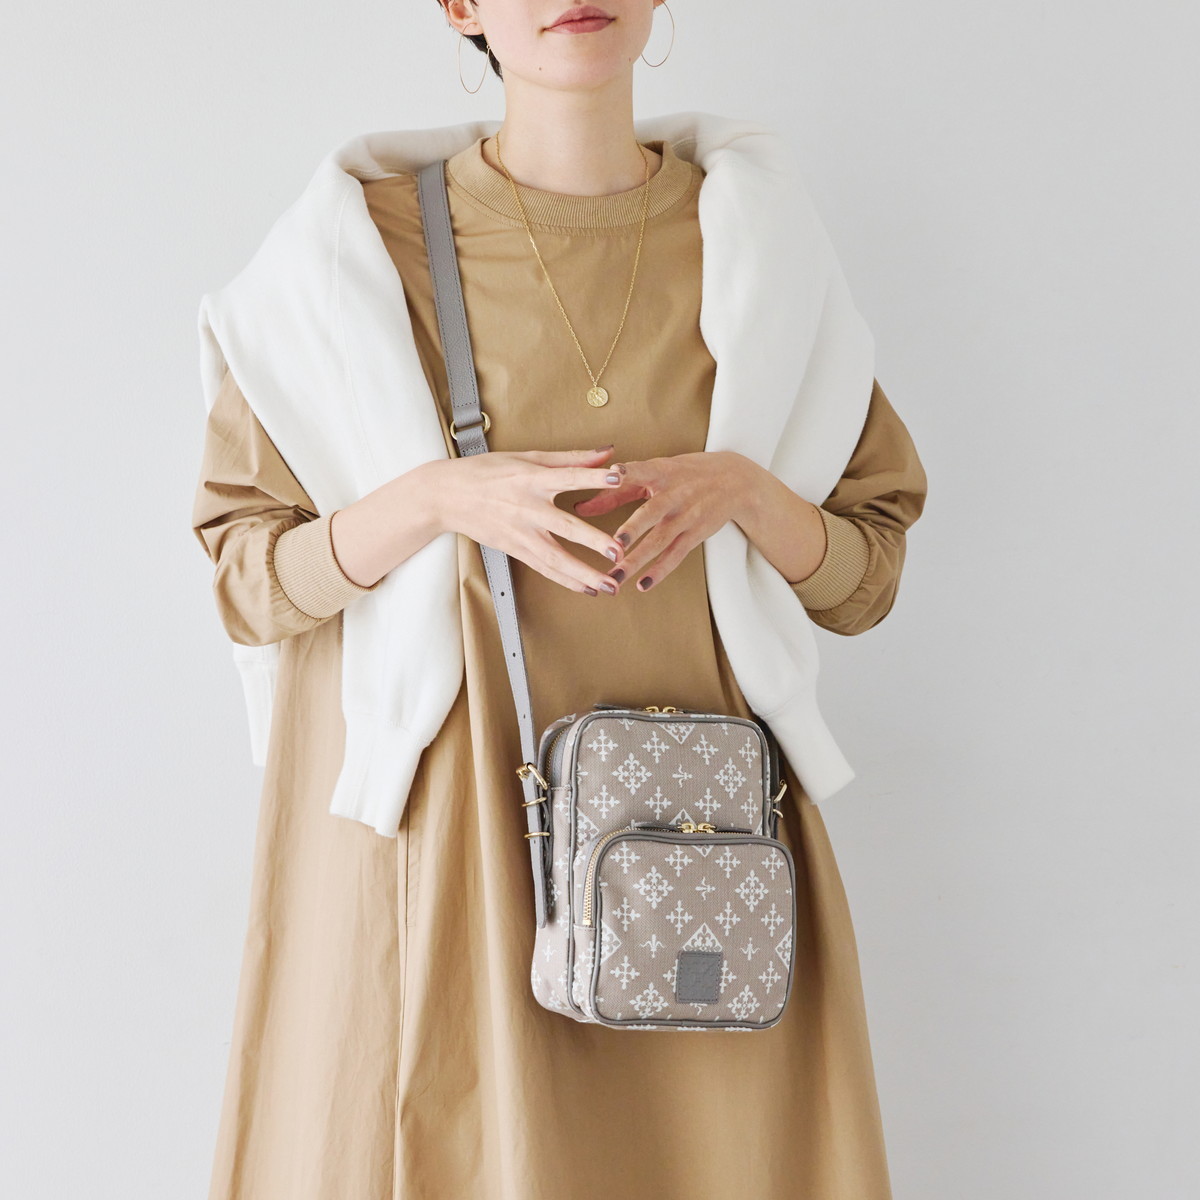 WEB限定】【VINTAGE COLLECTION】ショルダーバッグ | ラシット(russet ...